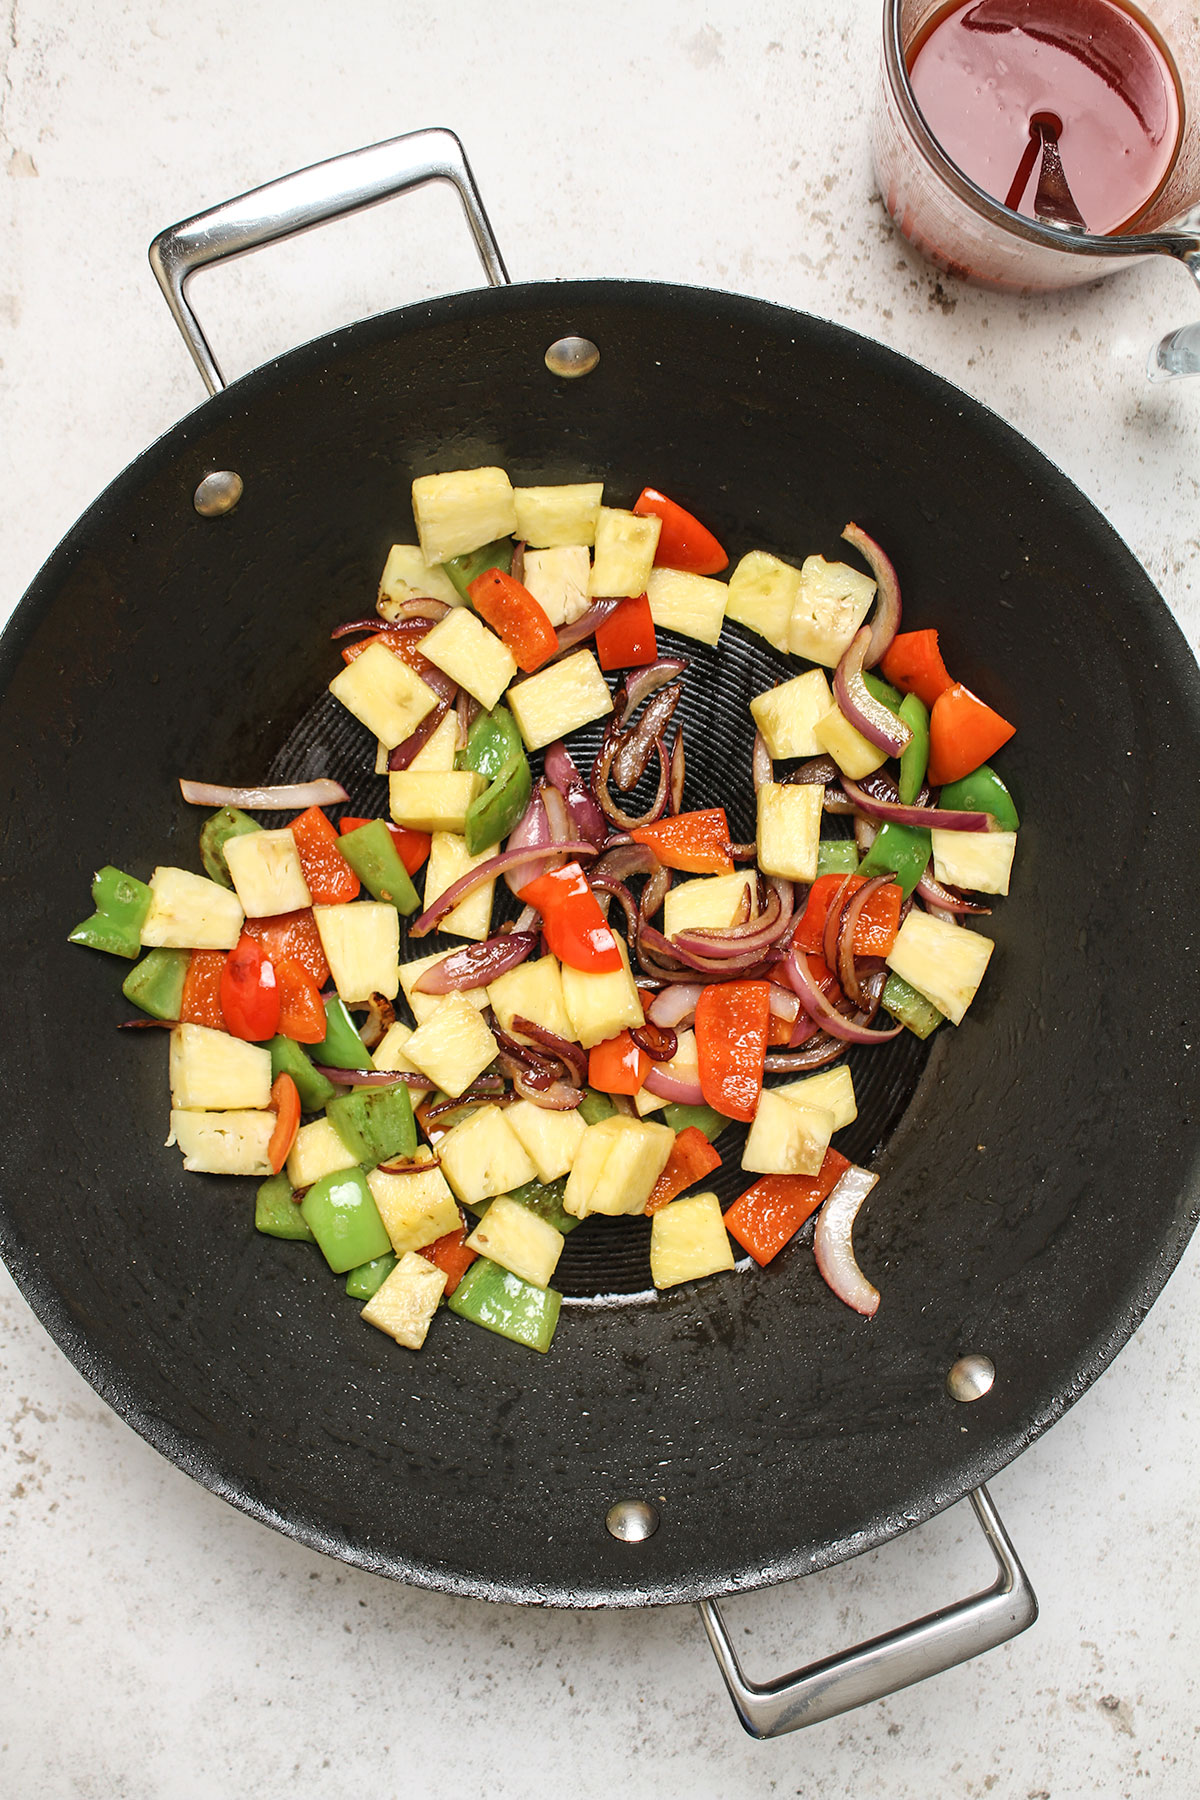 Onions, pepper and pineapple in a wok.